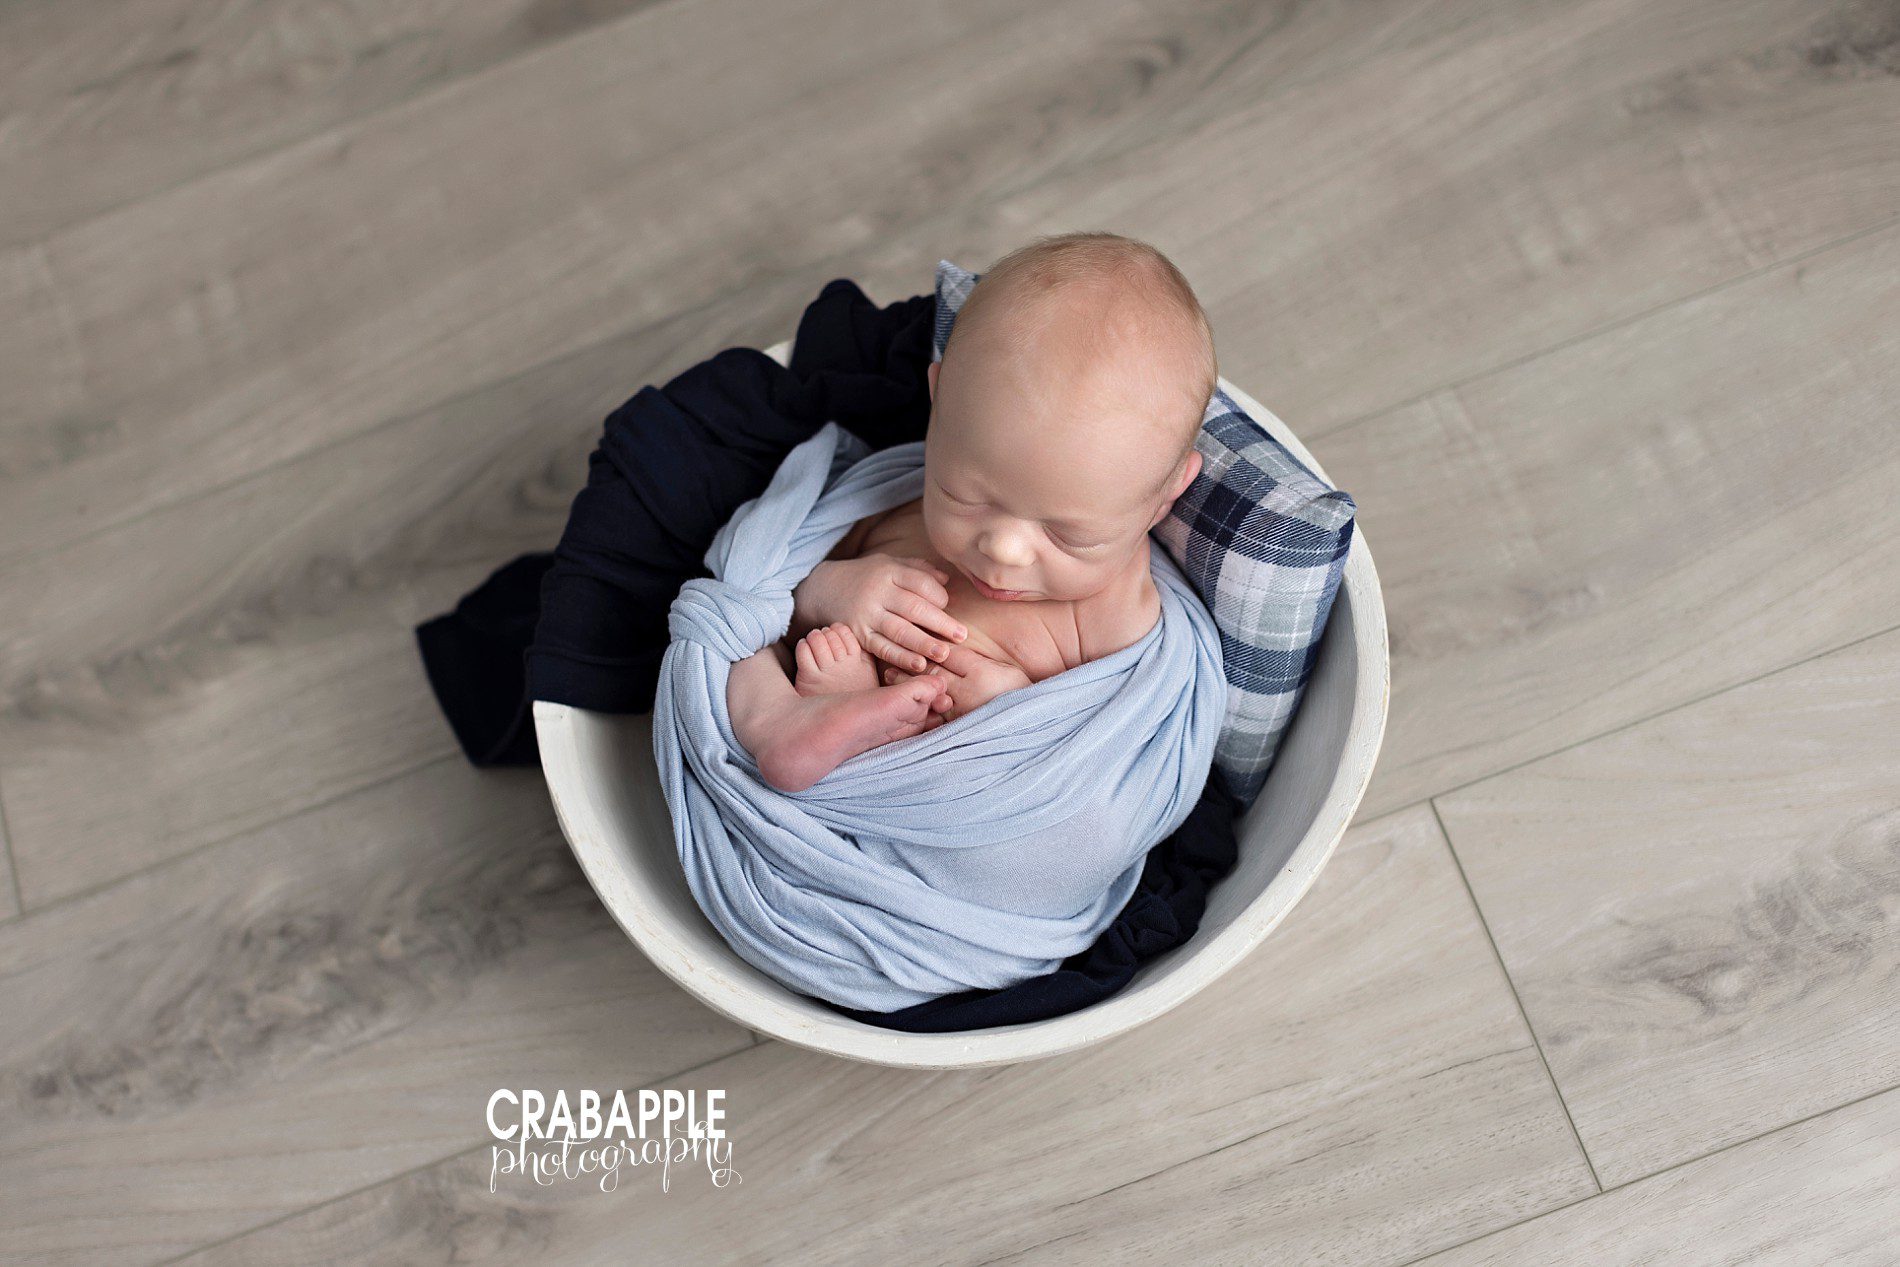 newborn photos using classic white, blue and gray color palette